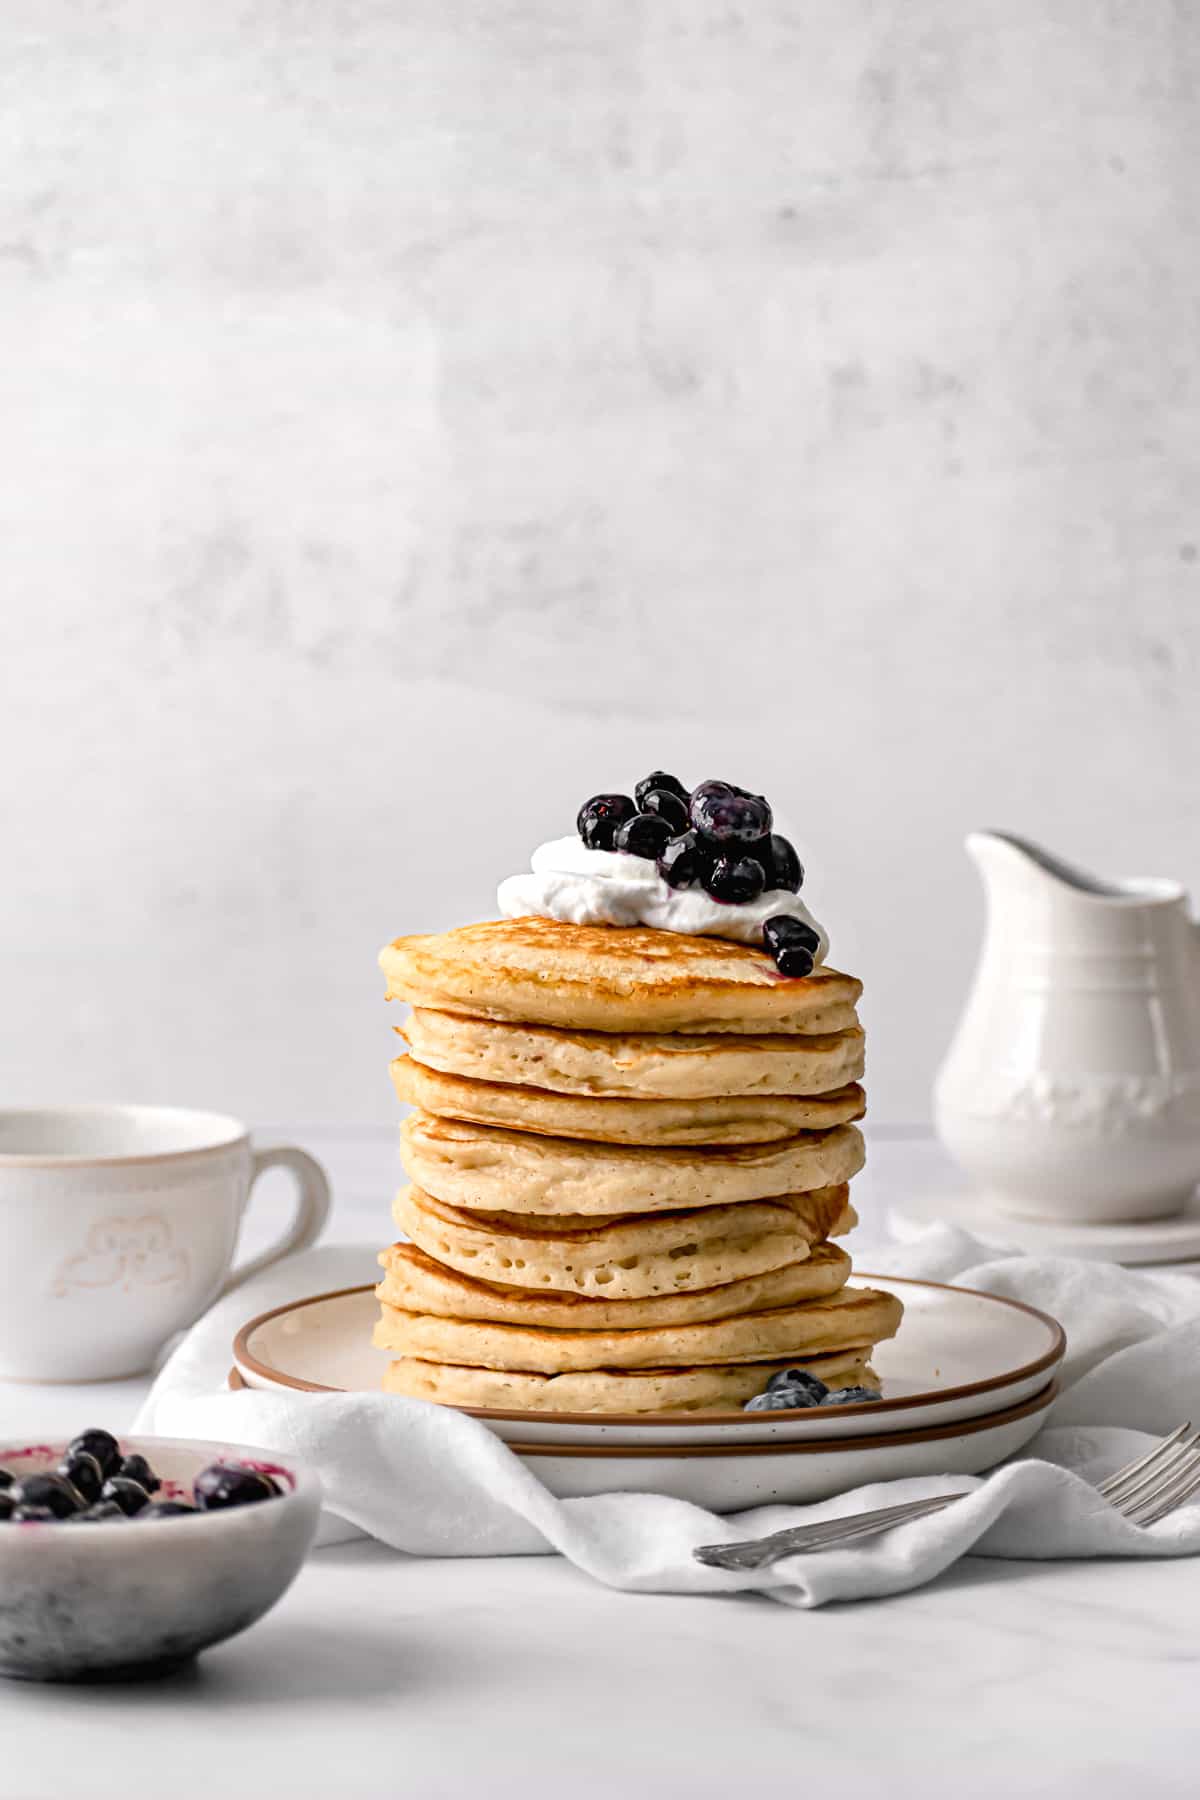 large stack of fluffy pancakes on white plate with whip cream and blueberry jam.